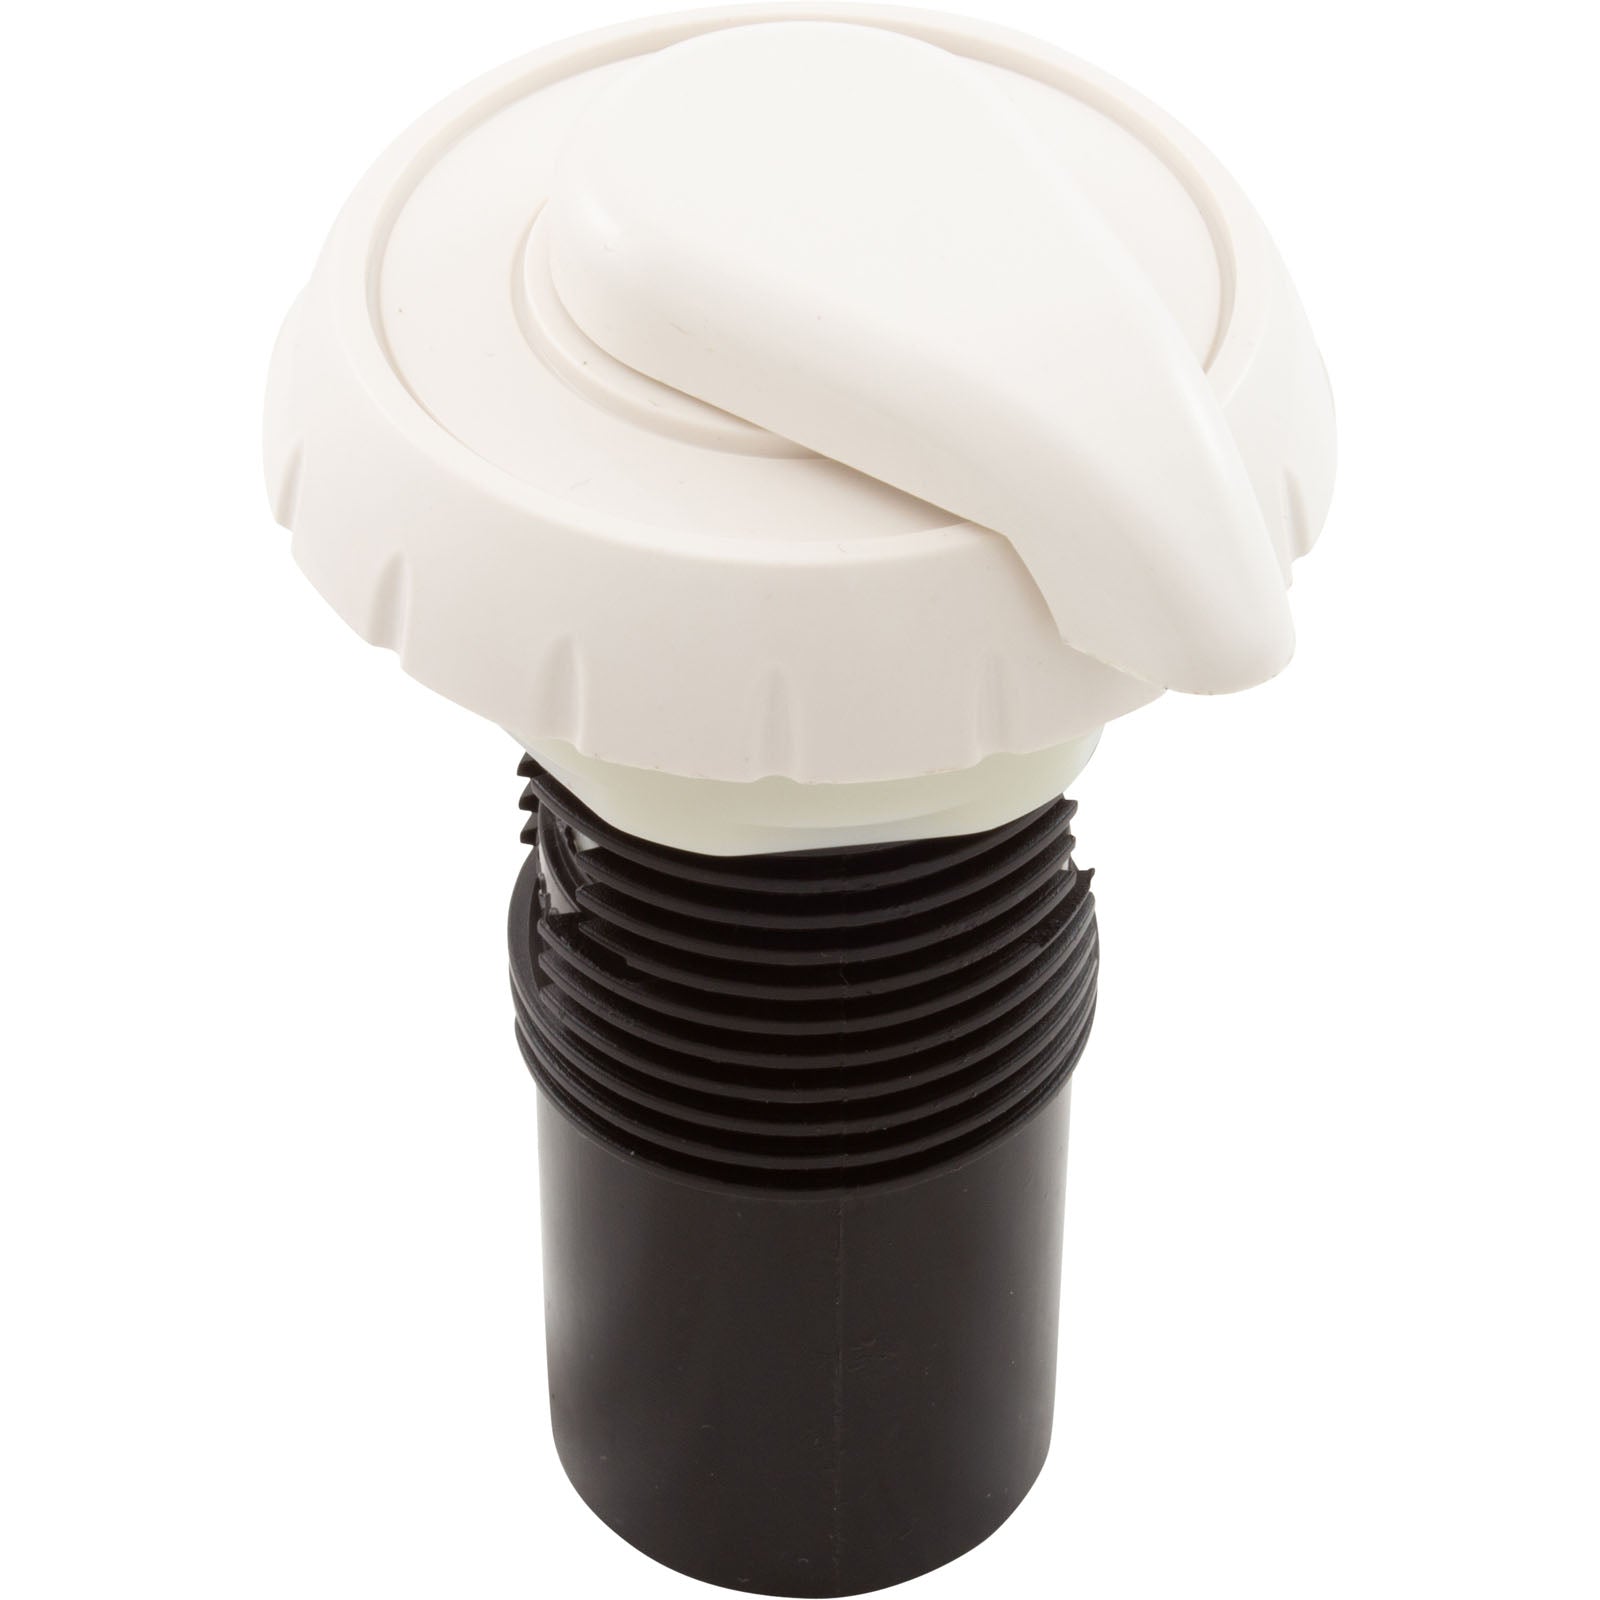 Waterway Air Control - 1" Top Access Notched Style, White (660-3570)